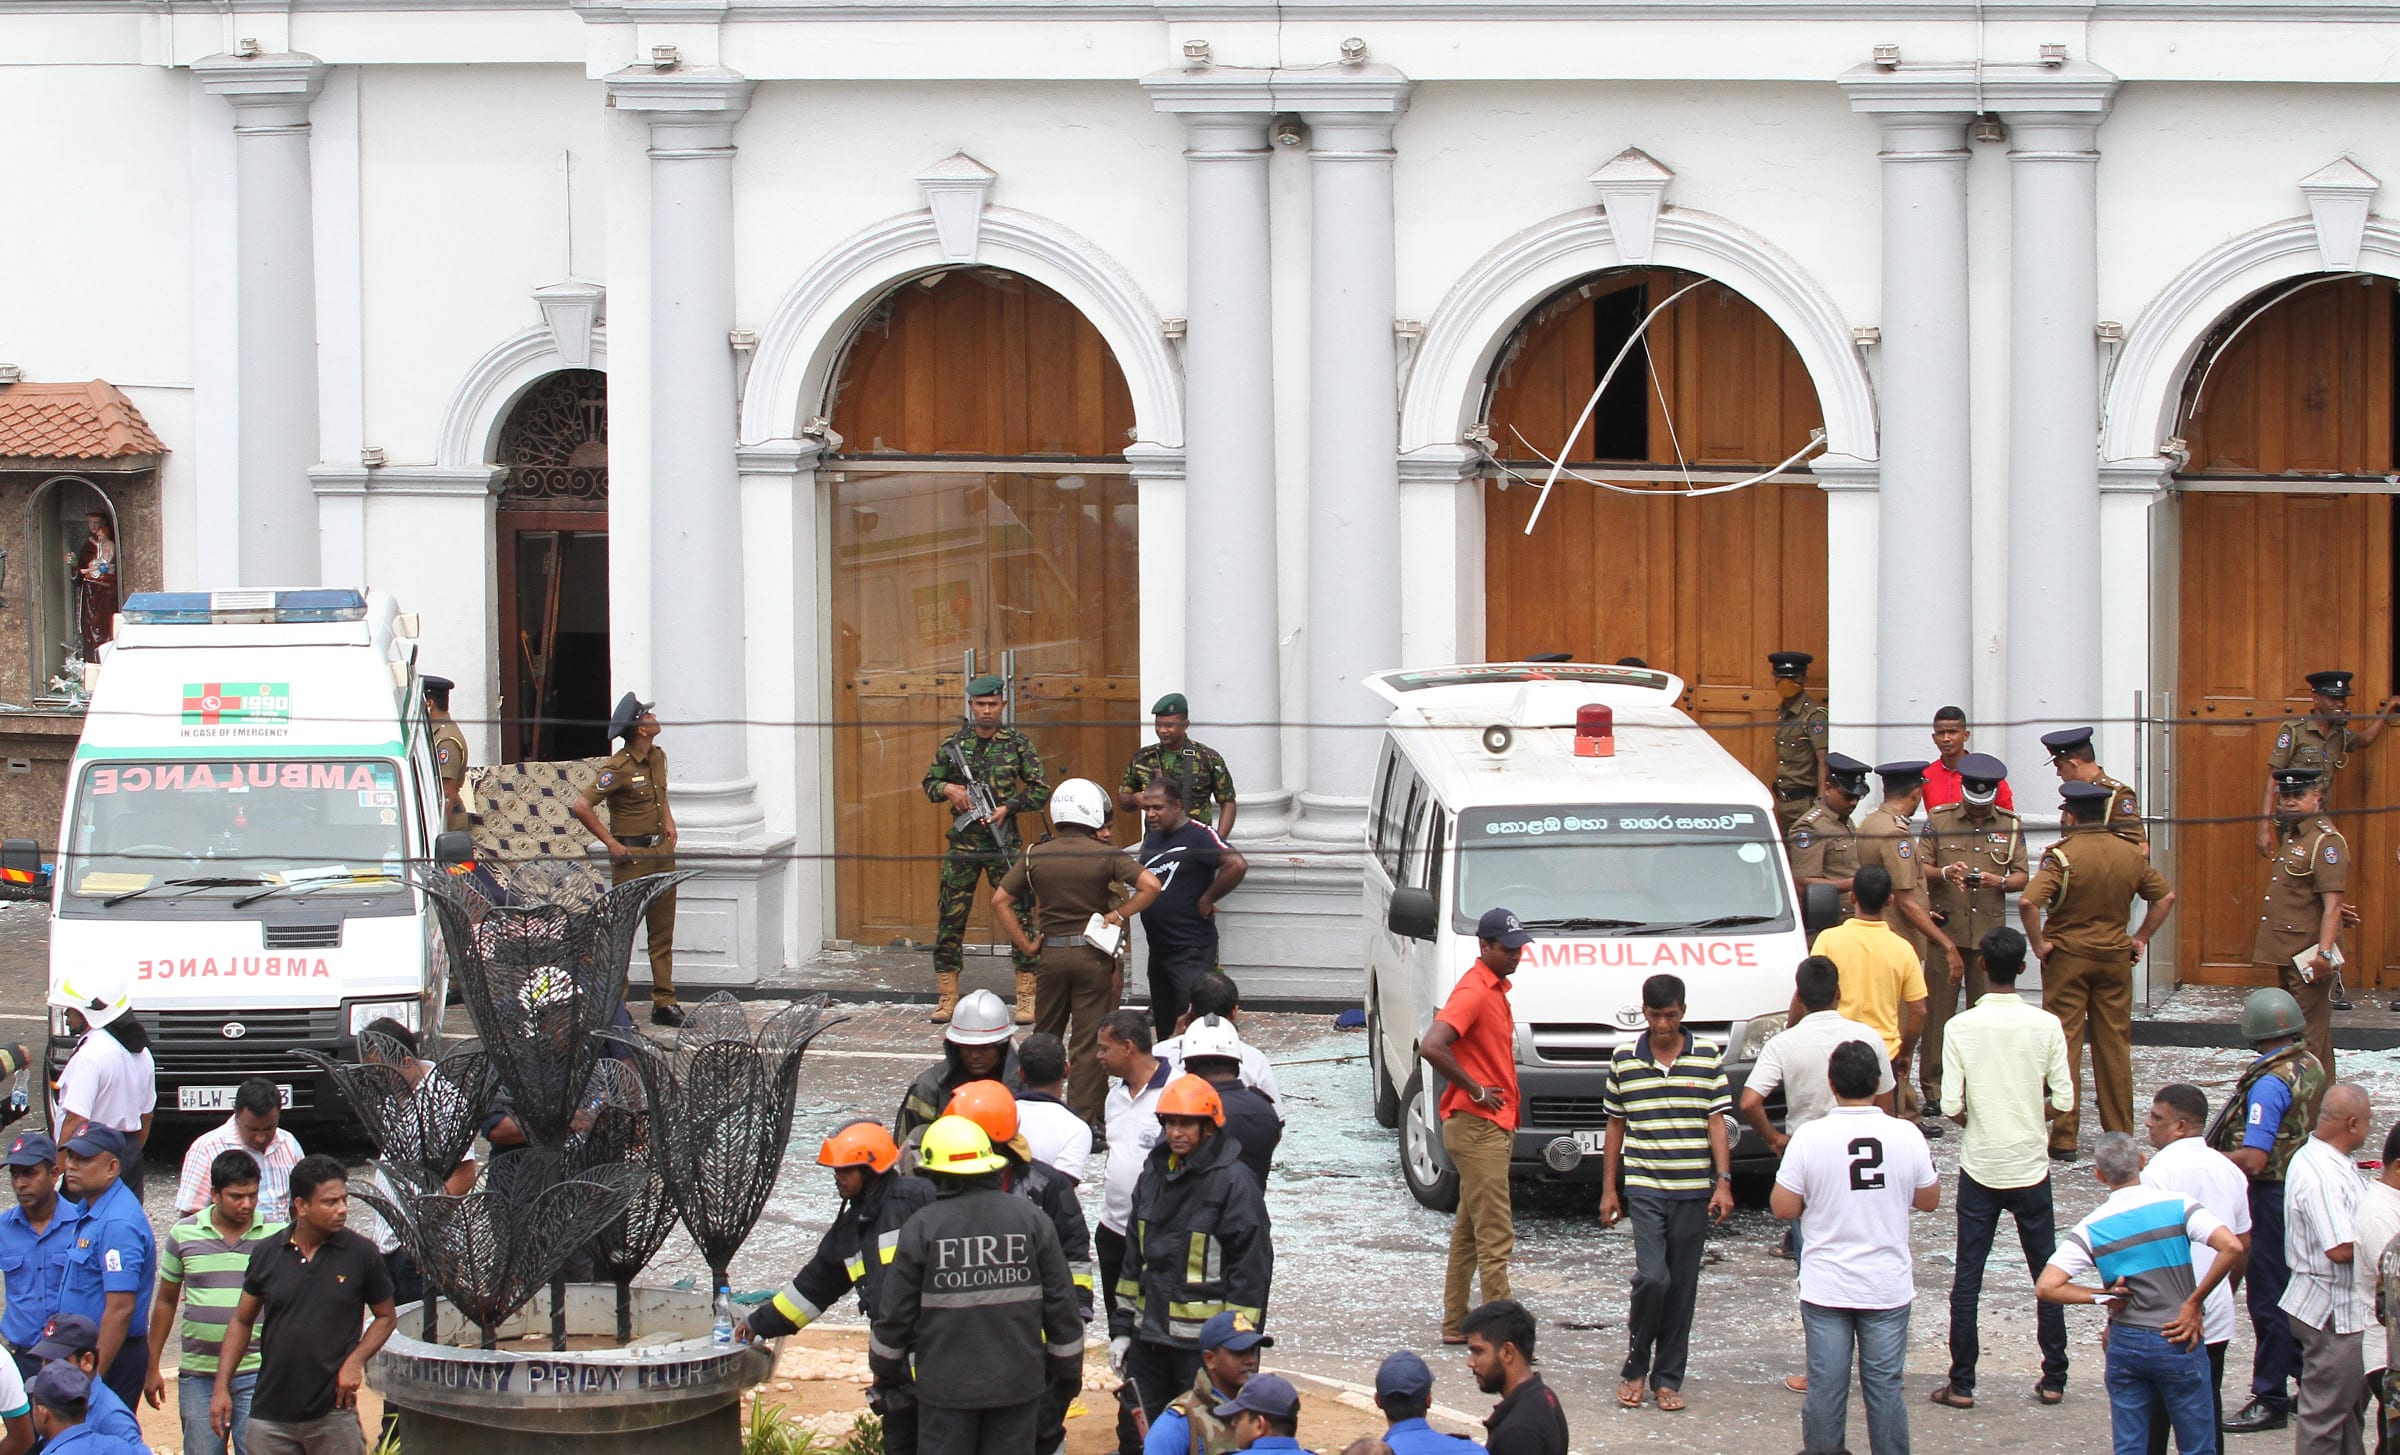 Security forces secure the area around the St. Anthony's Shrine after an explosion hit St Anthony's Church in Kochchikade in Colombo, Sri Lanka on 21 April, 2019 [Chamila Karunarathne/Anadolu Agency]